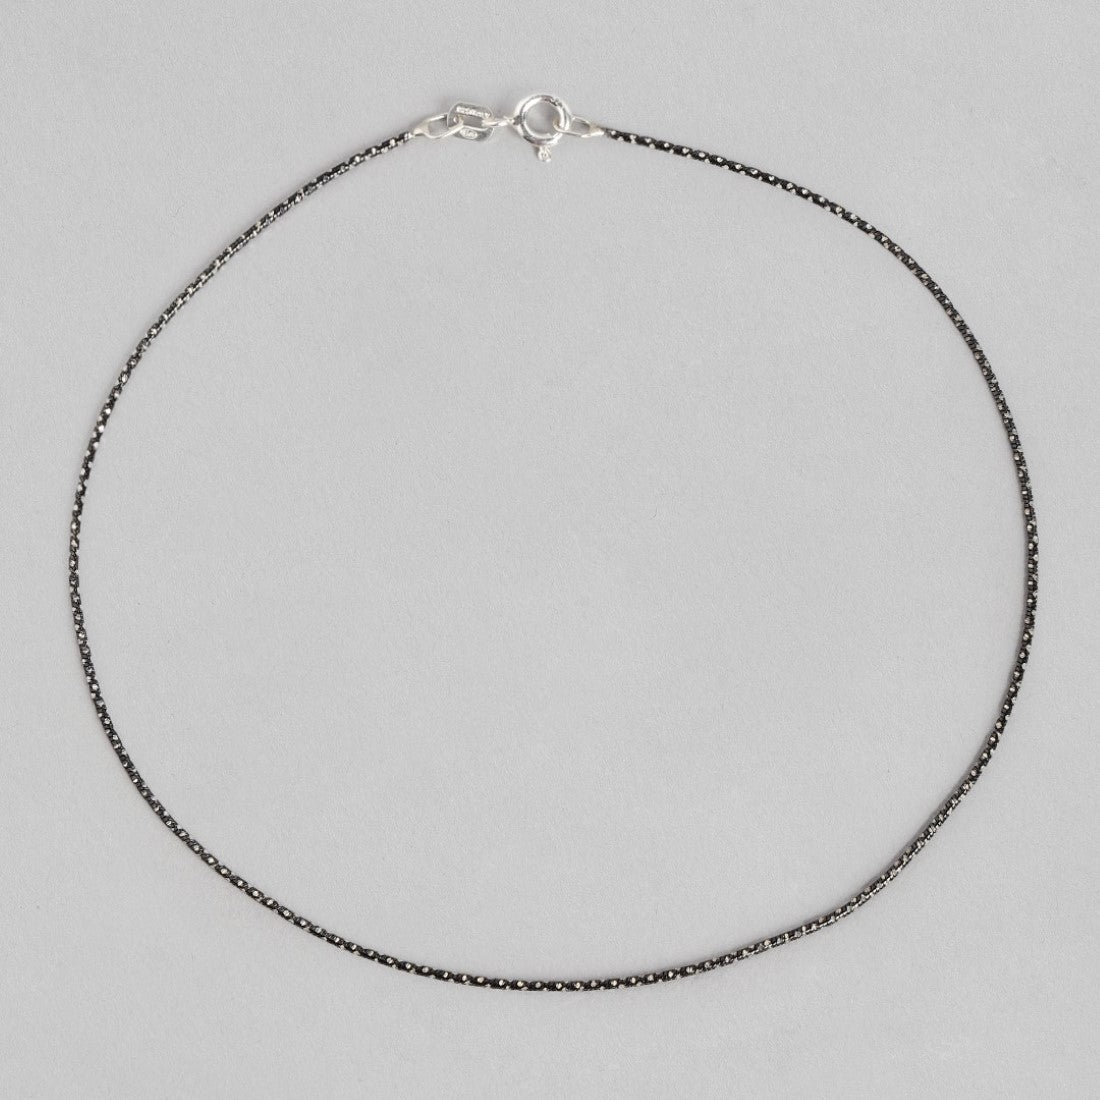 Luminous Links Rhodium-Plated 925 Sterling Silver Beads Chain Anklet